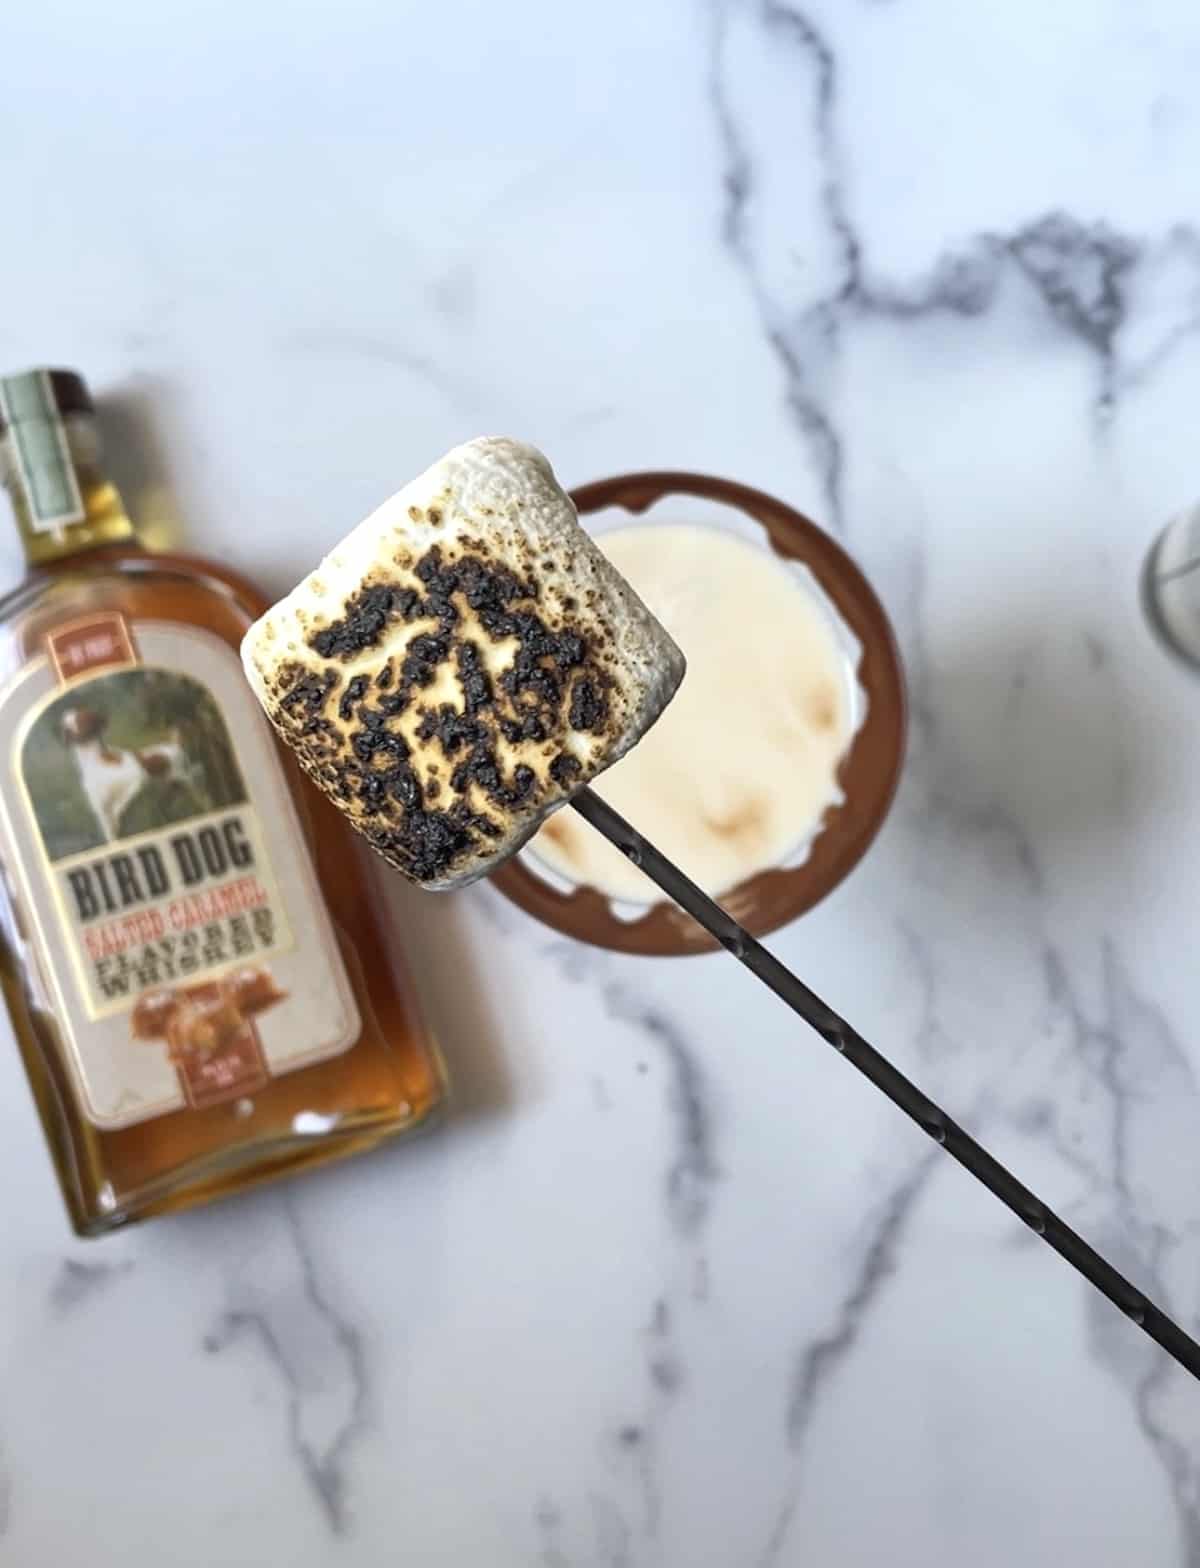 Bird Dog Whiskey bottle with cocktail in a martini glass with a marshmallow over the glass on a skewer.